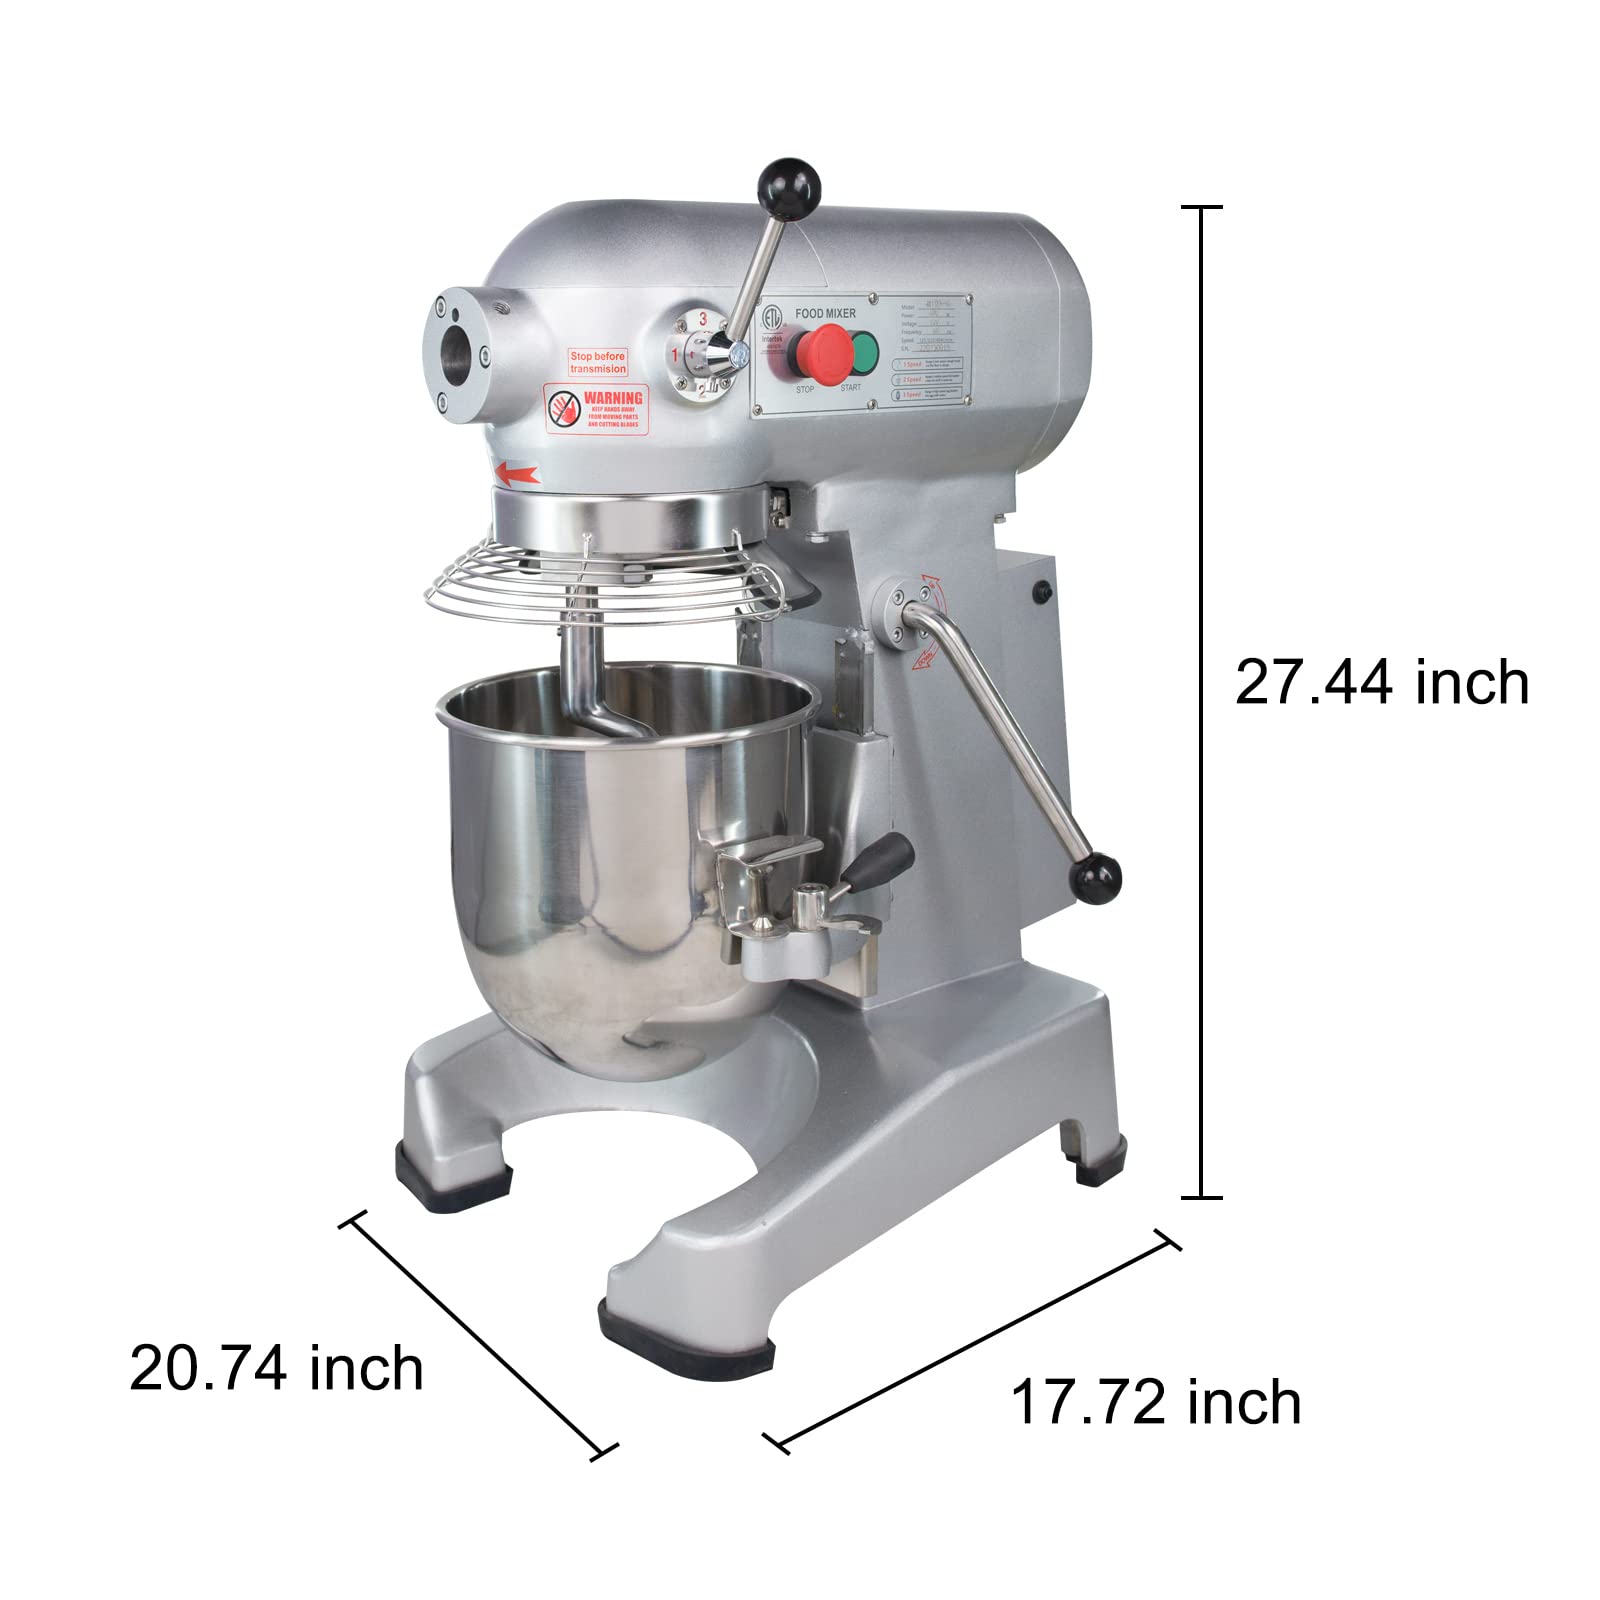 Hakka Commercial Planetary Mixers 4 Funtion Stainless Steel Food Mixer (10 Quart (M10A-4))